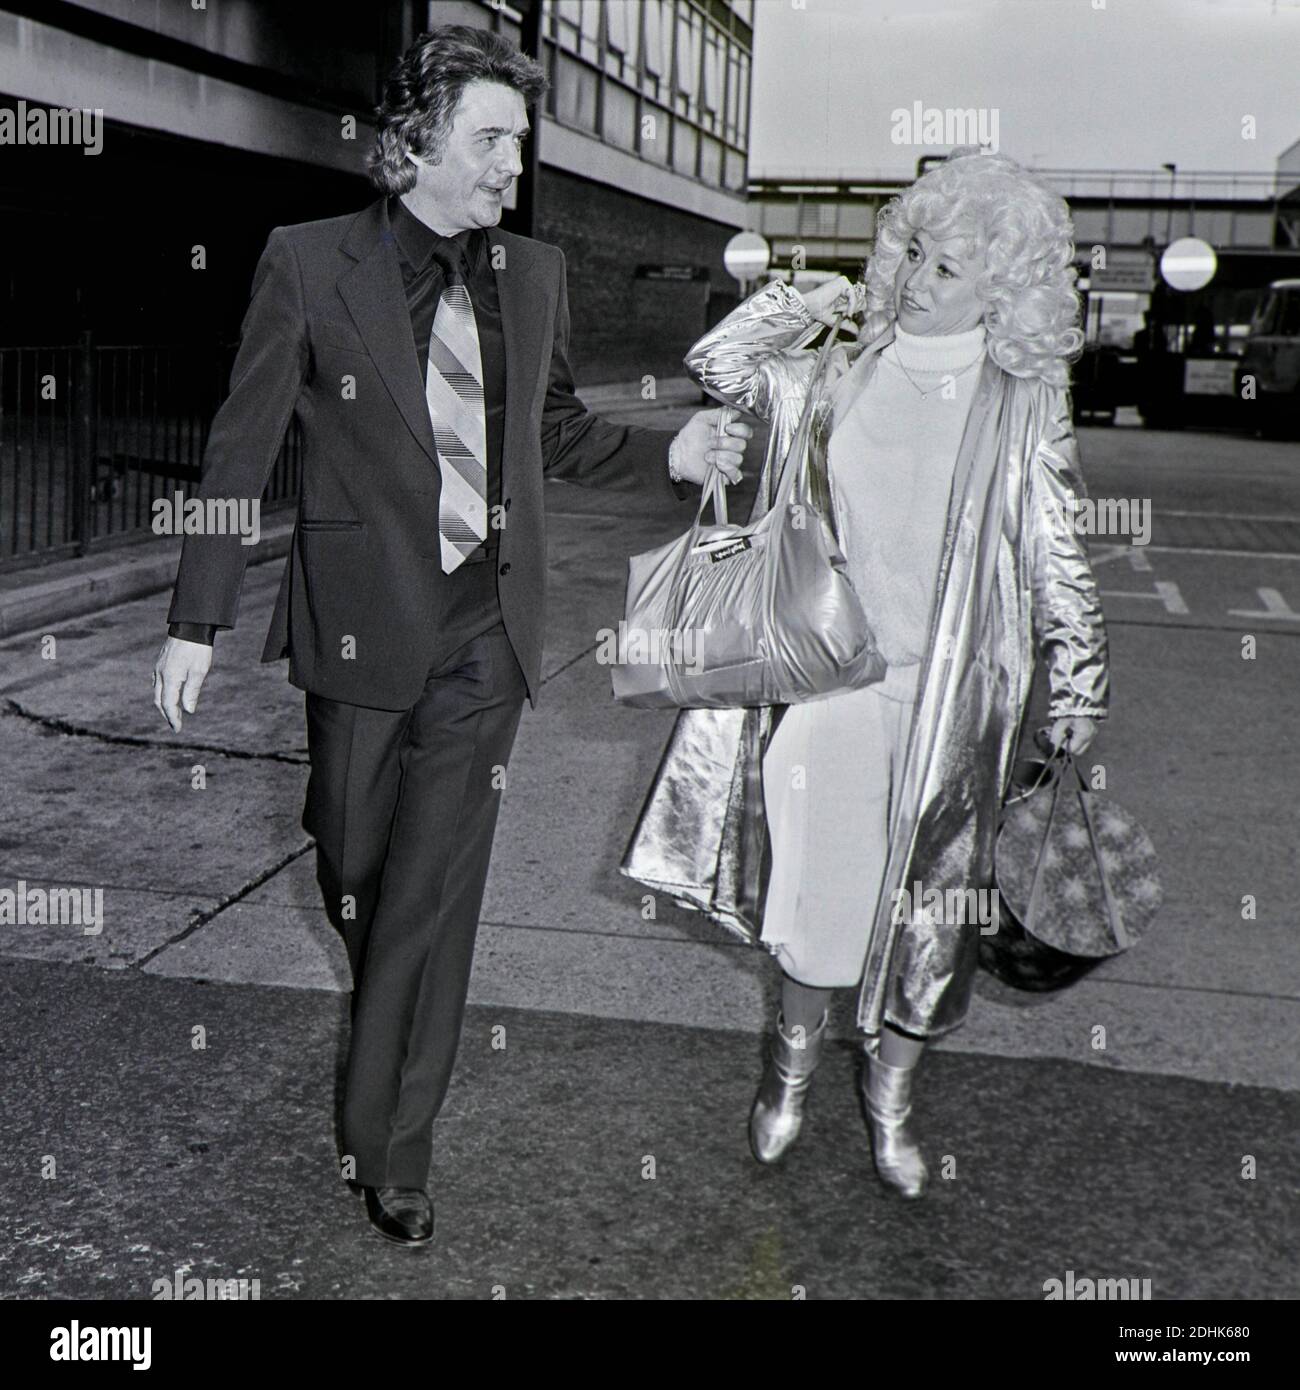 Dame Barbara Windsor and her husband Ronnie Knight arriving at Heathrow Airport from Australia, 4th November 1981. Stock Photo